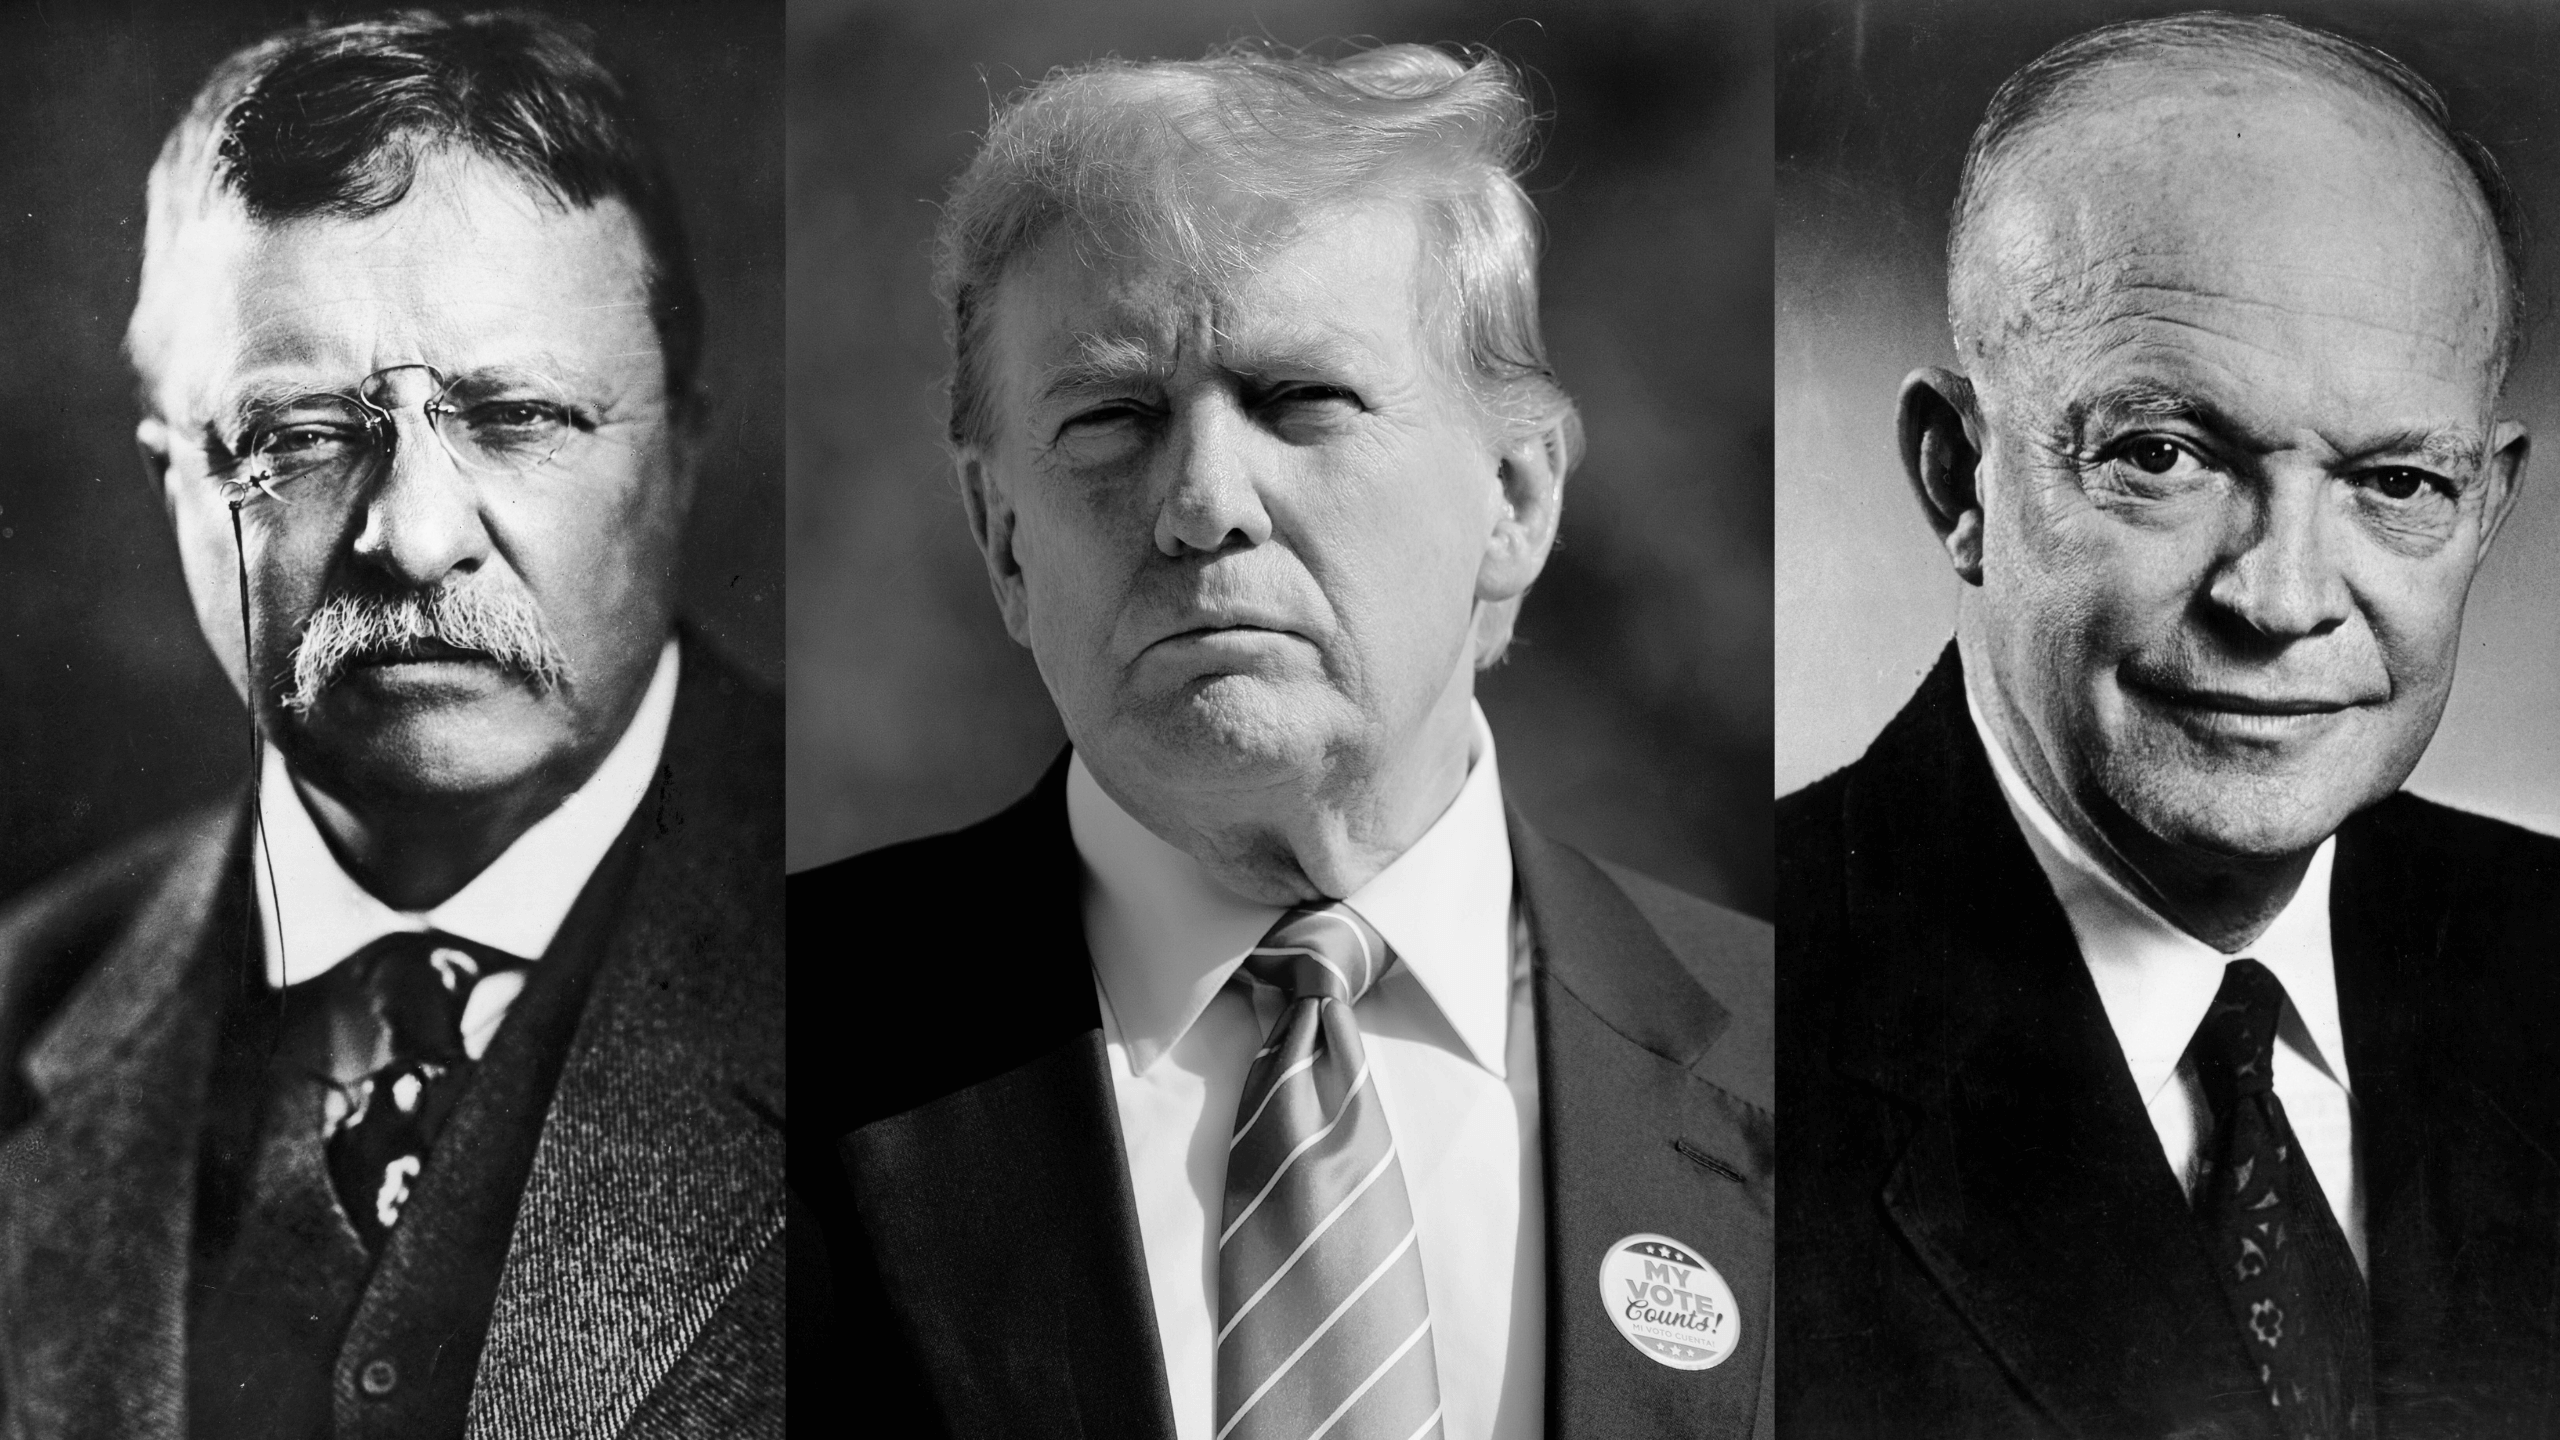 Left: Theodore Roosevelt ca. 1950 (Hulton Archive/Stringer via Getty Images); middle: Donald Trump, March 19, 2024 (Joe Raedle via Getty Images); right: Dwight Eisenhower ca. 1955 (Hulton Archive/Stringer via Getty Images)